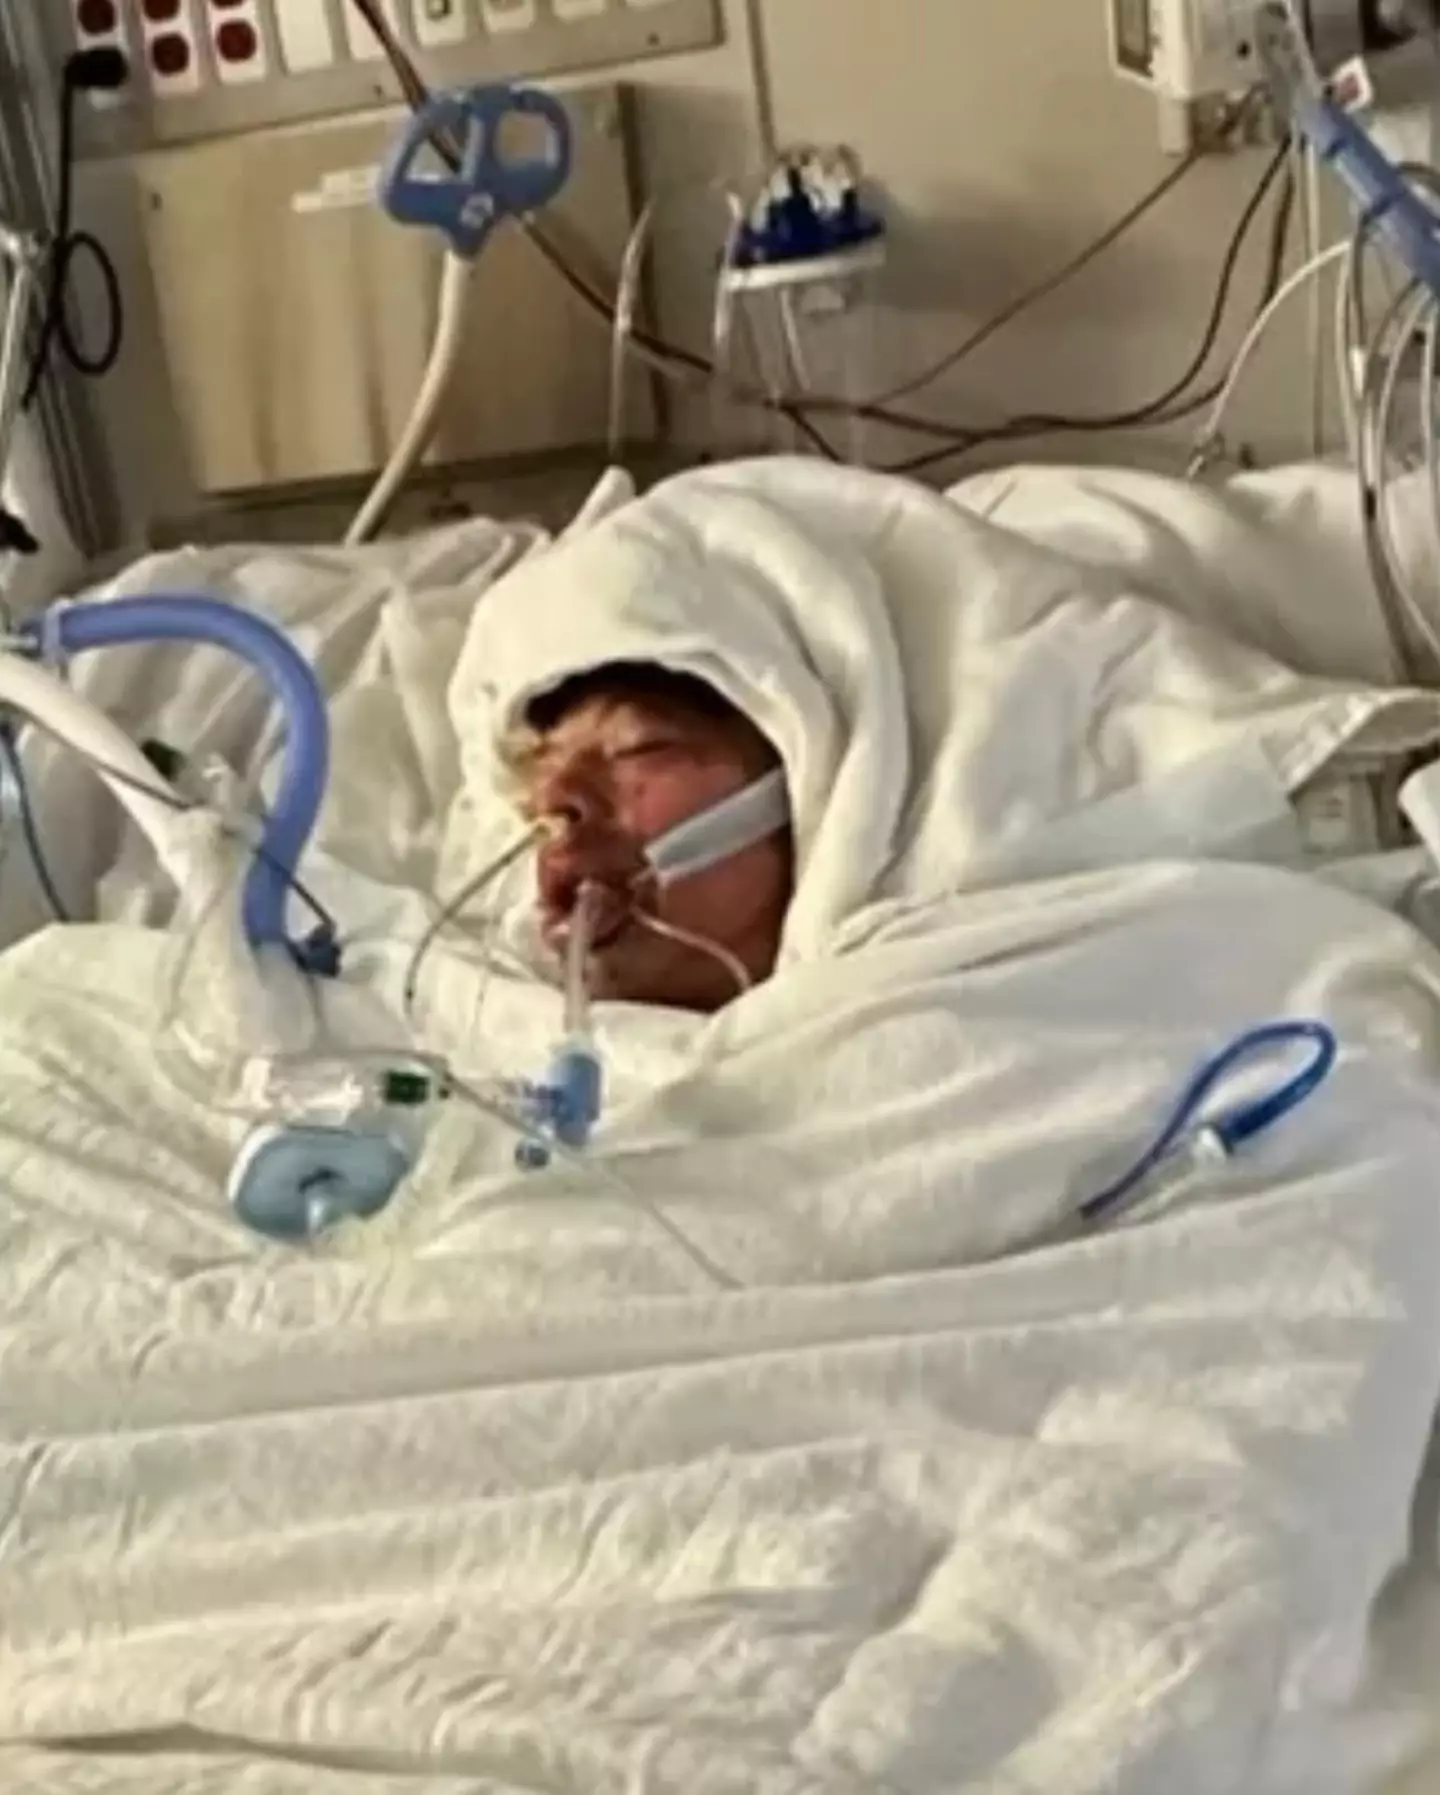 Mason Dark was rushed to the UNC Burn Center in Chapel Hill, after trying out a TikTok challenge that involved spraying a highly inflammable paint aerosol into a lighter.